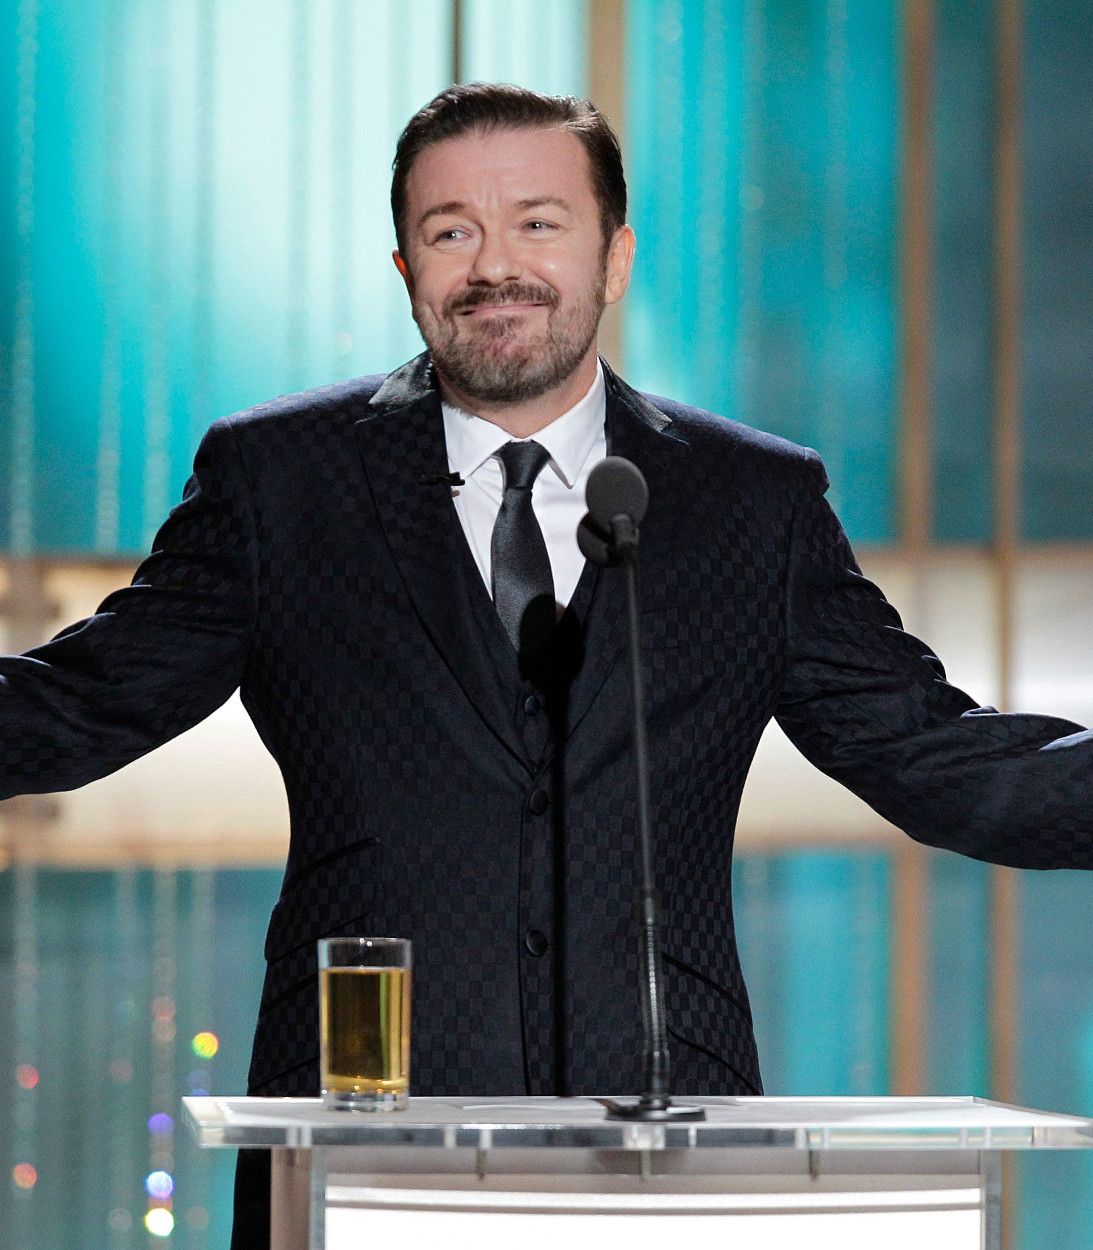 Ricky Gervais hosting the Golden Globes for the final time in 2020